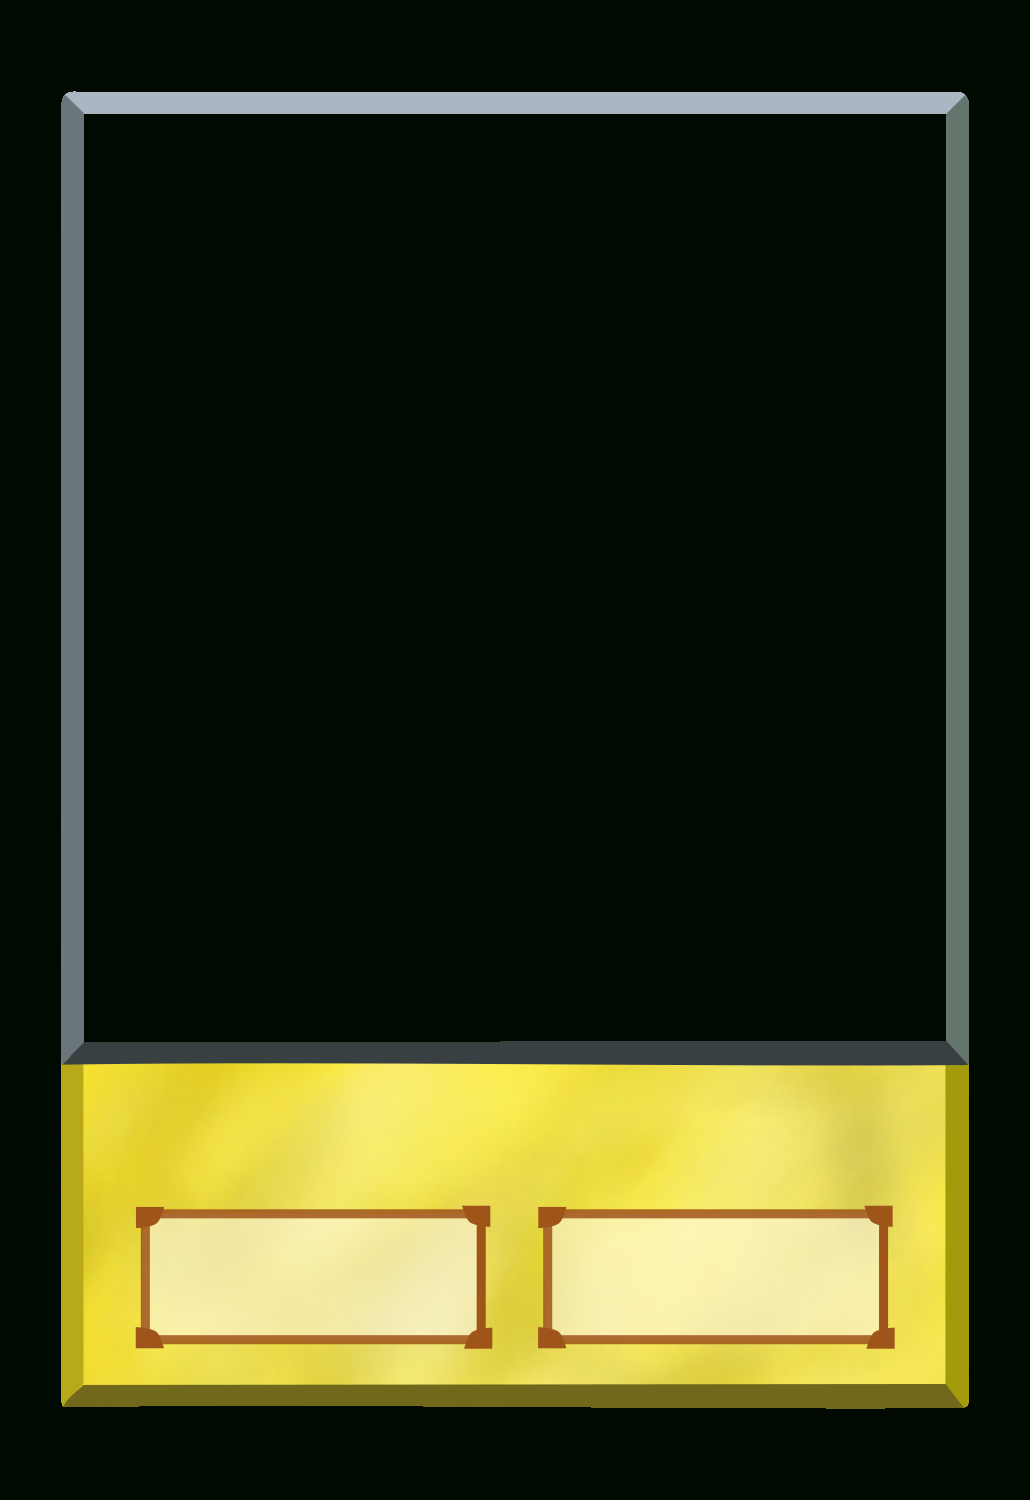 File:yu Gi Oh Anime Style Cards Normal Monster Template Regarding Yugioh Card Template